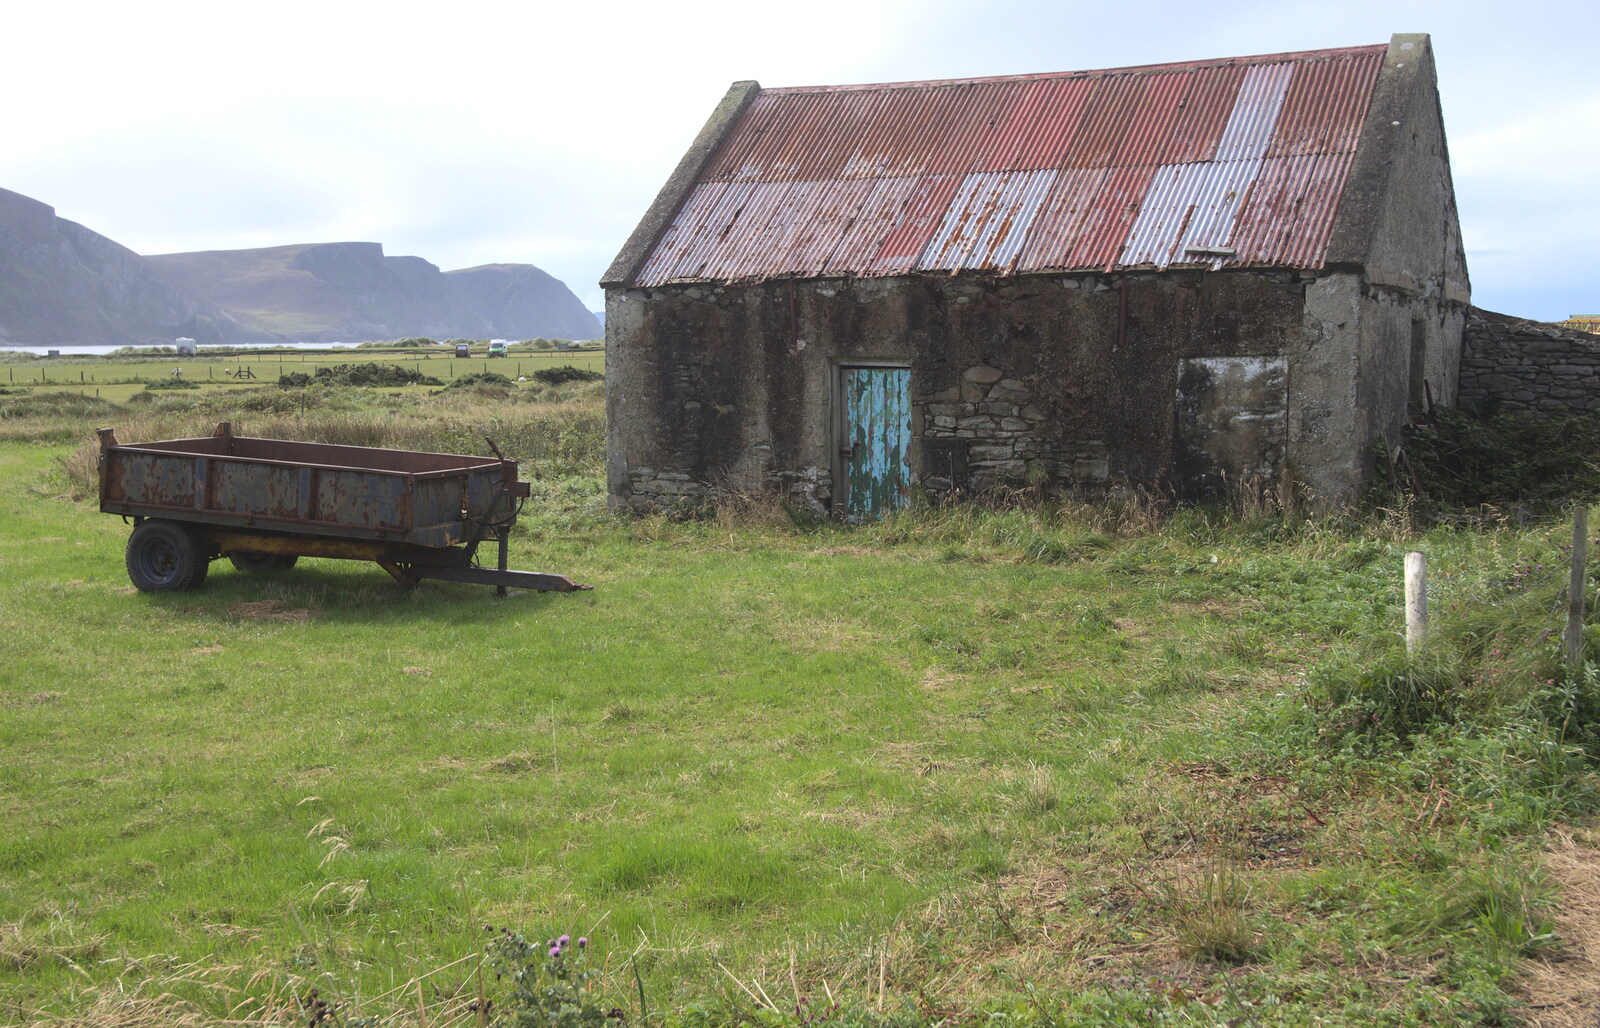 An old hut in Keel from Surfing Achill Island, Oileán Acla, Maigh Eo, Ireland - 8th August 2017